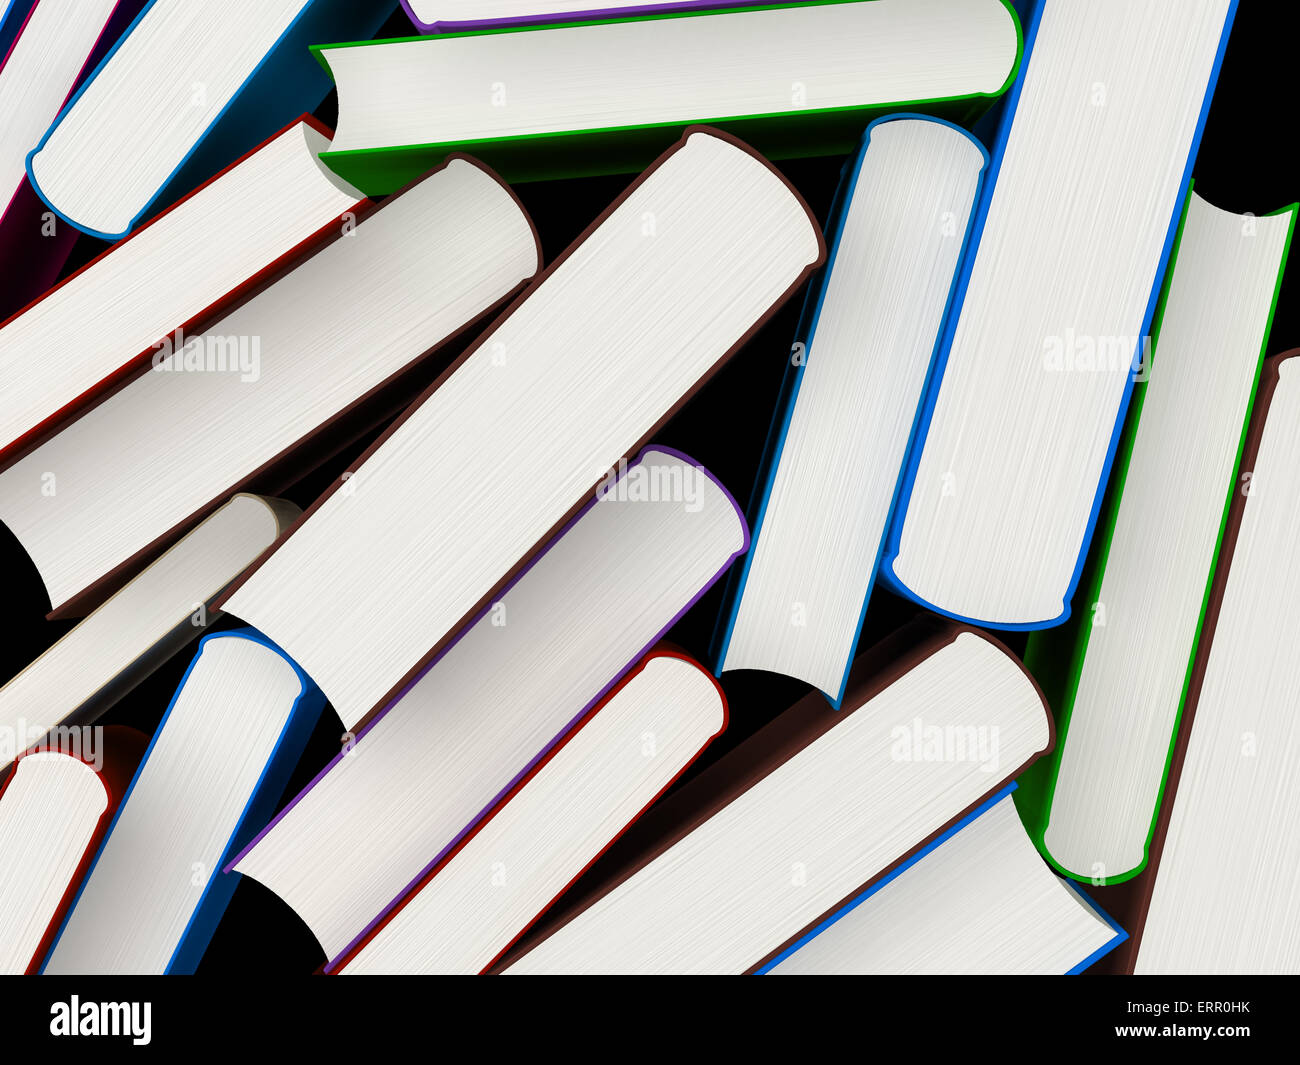 Heap of books in a hard cover, 3d illustration Stock Photo